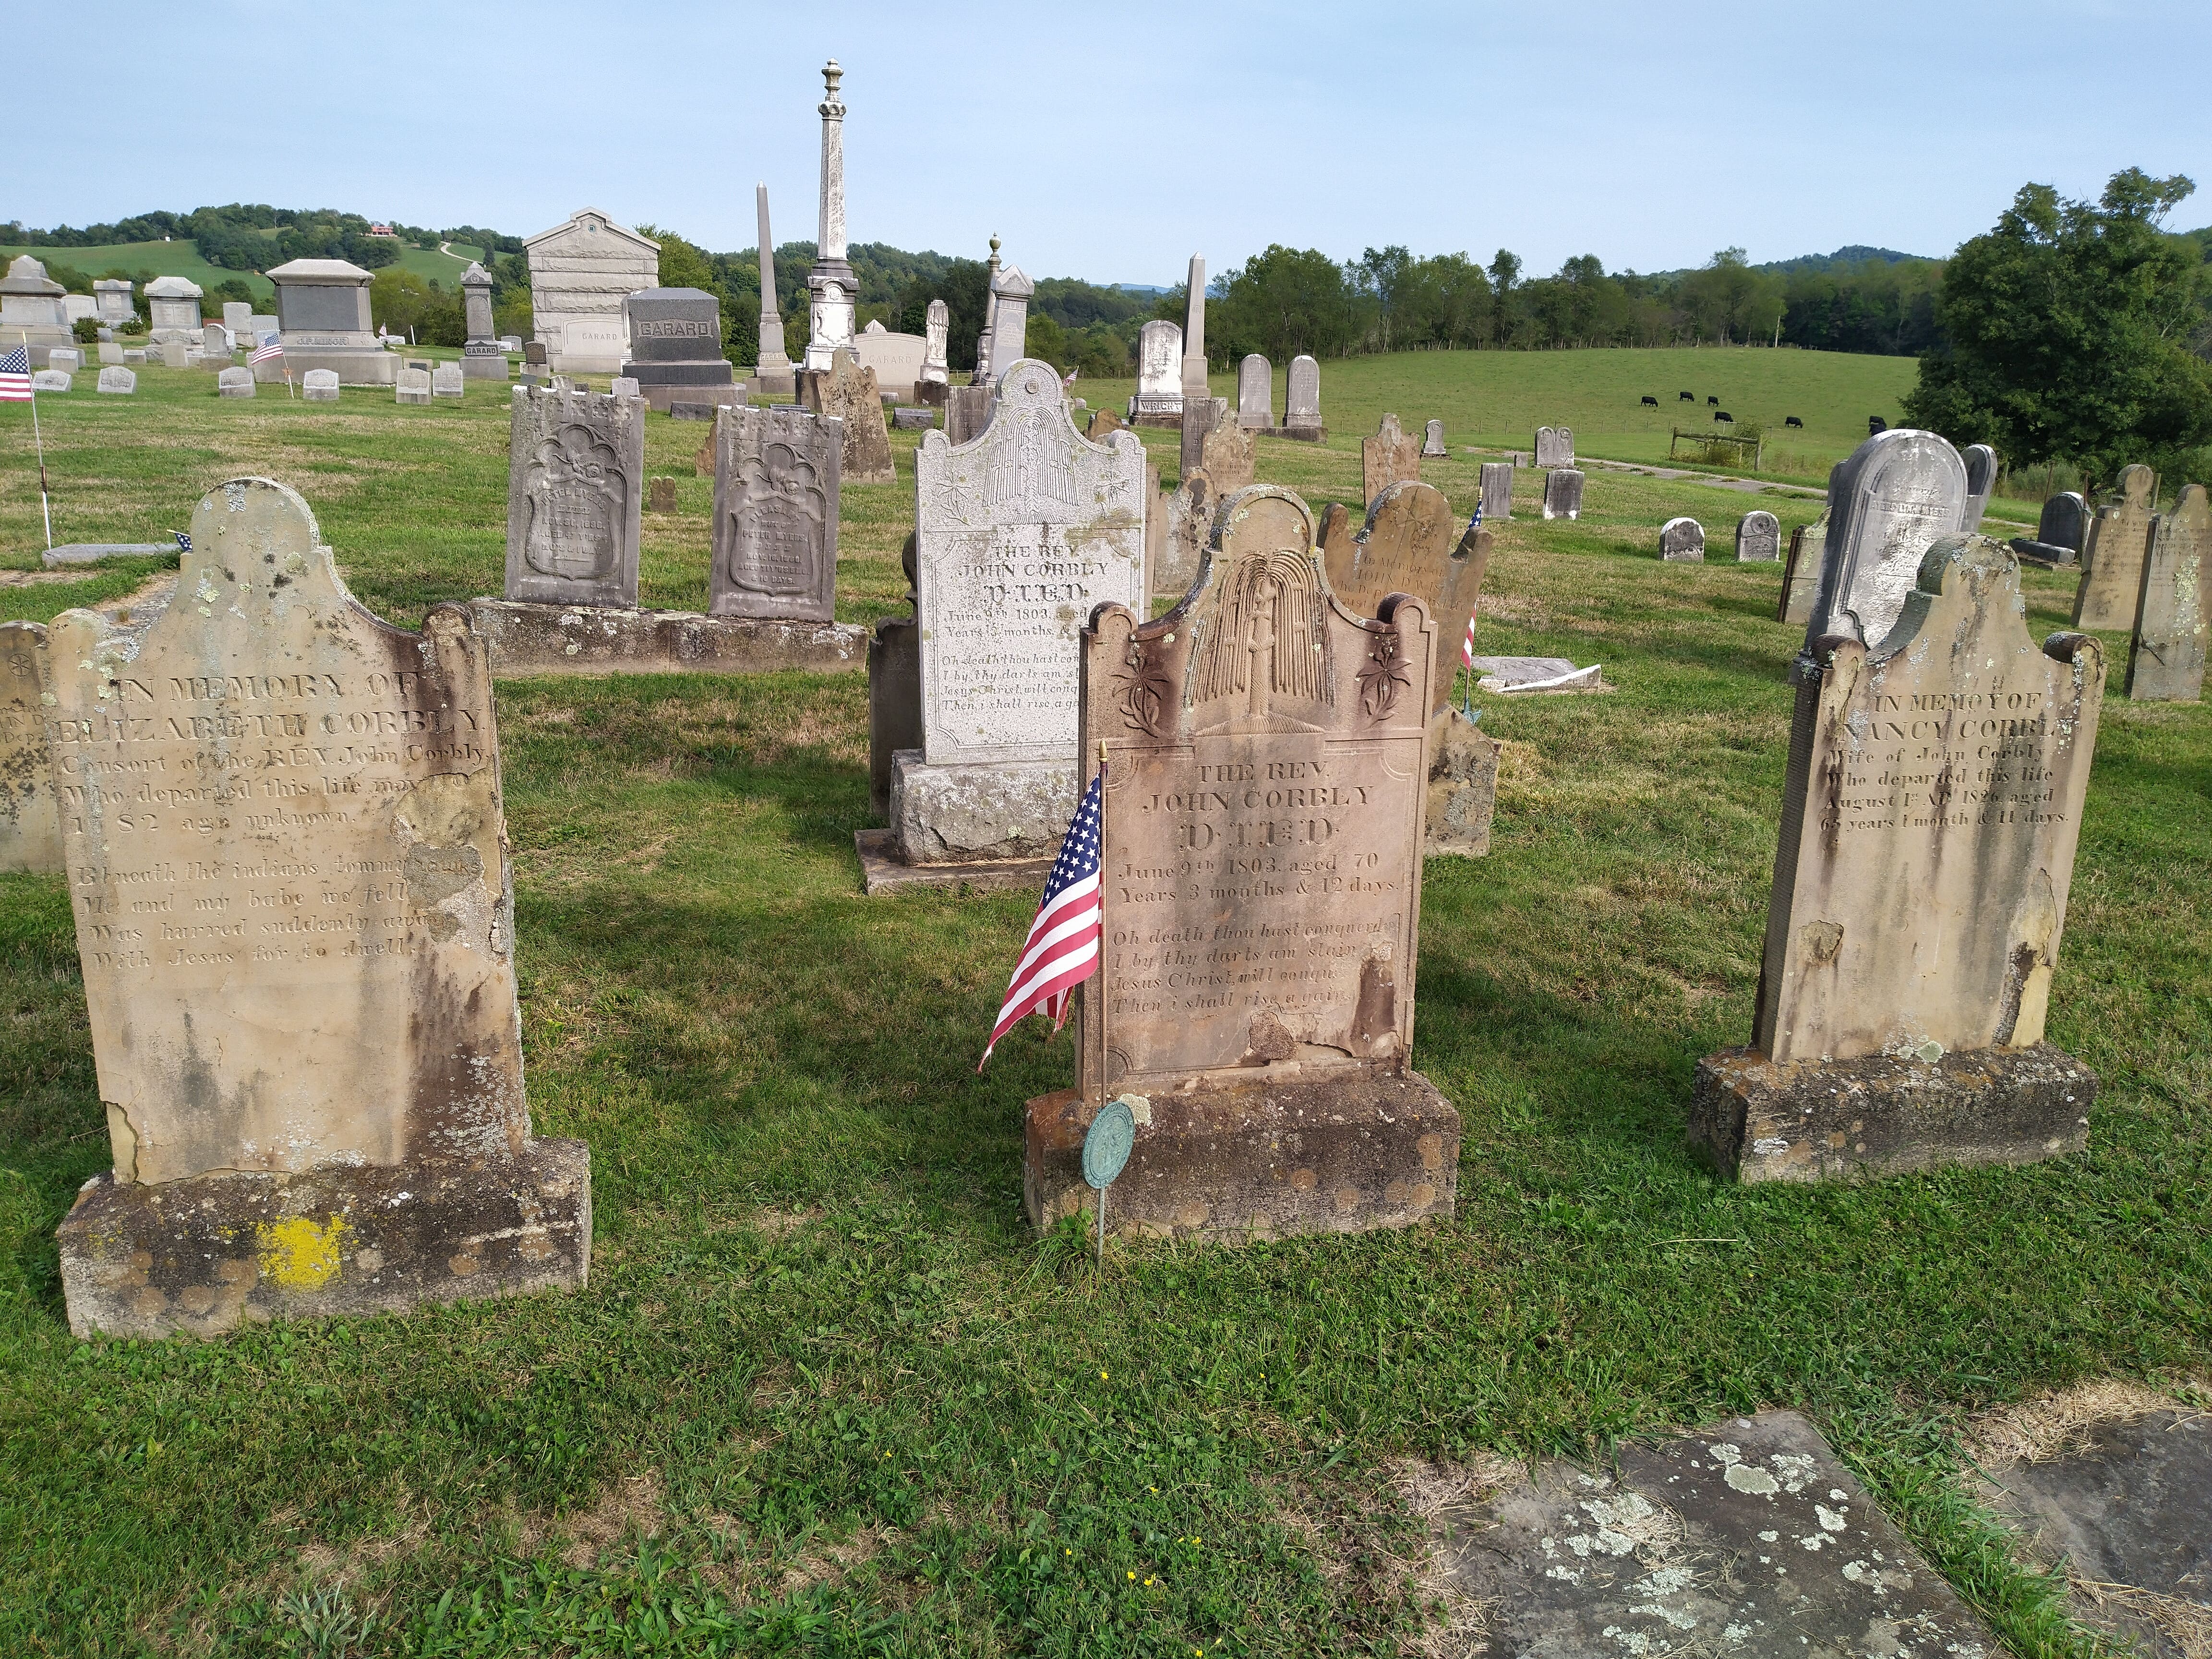 The grave of John Corbley (center) with his second and third wives beside him to the left and right